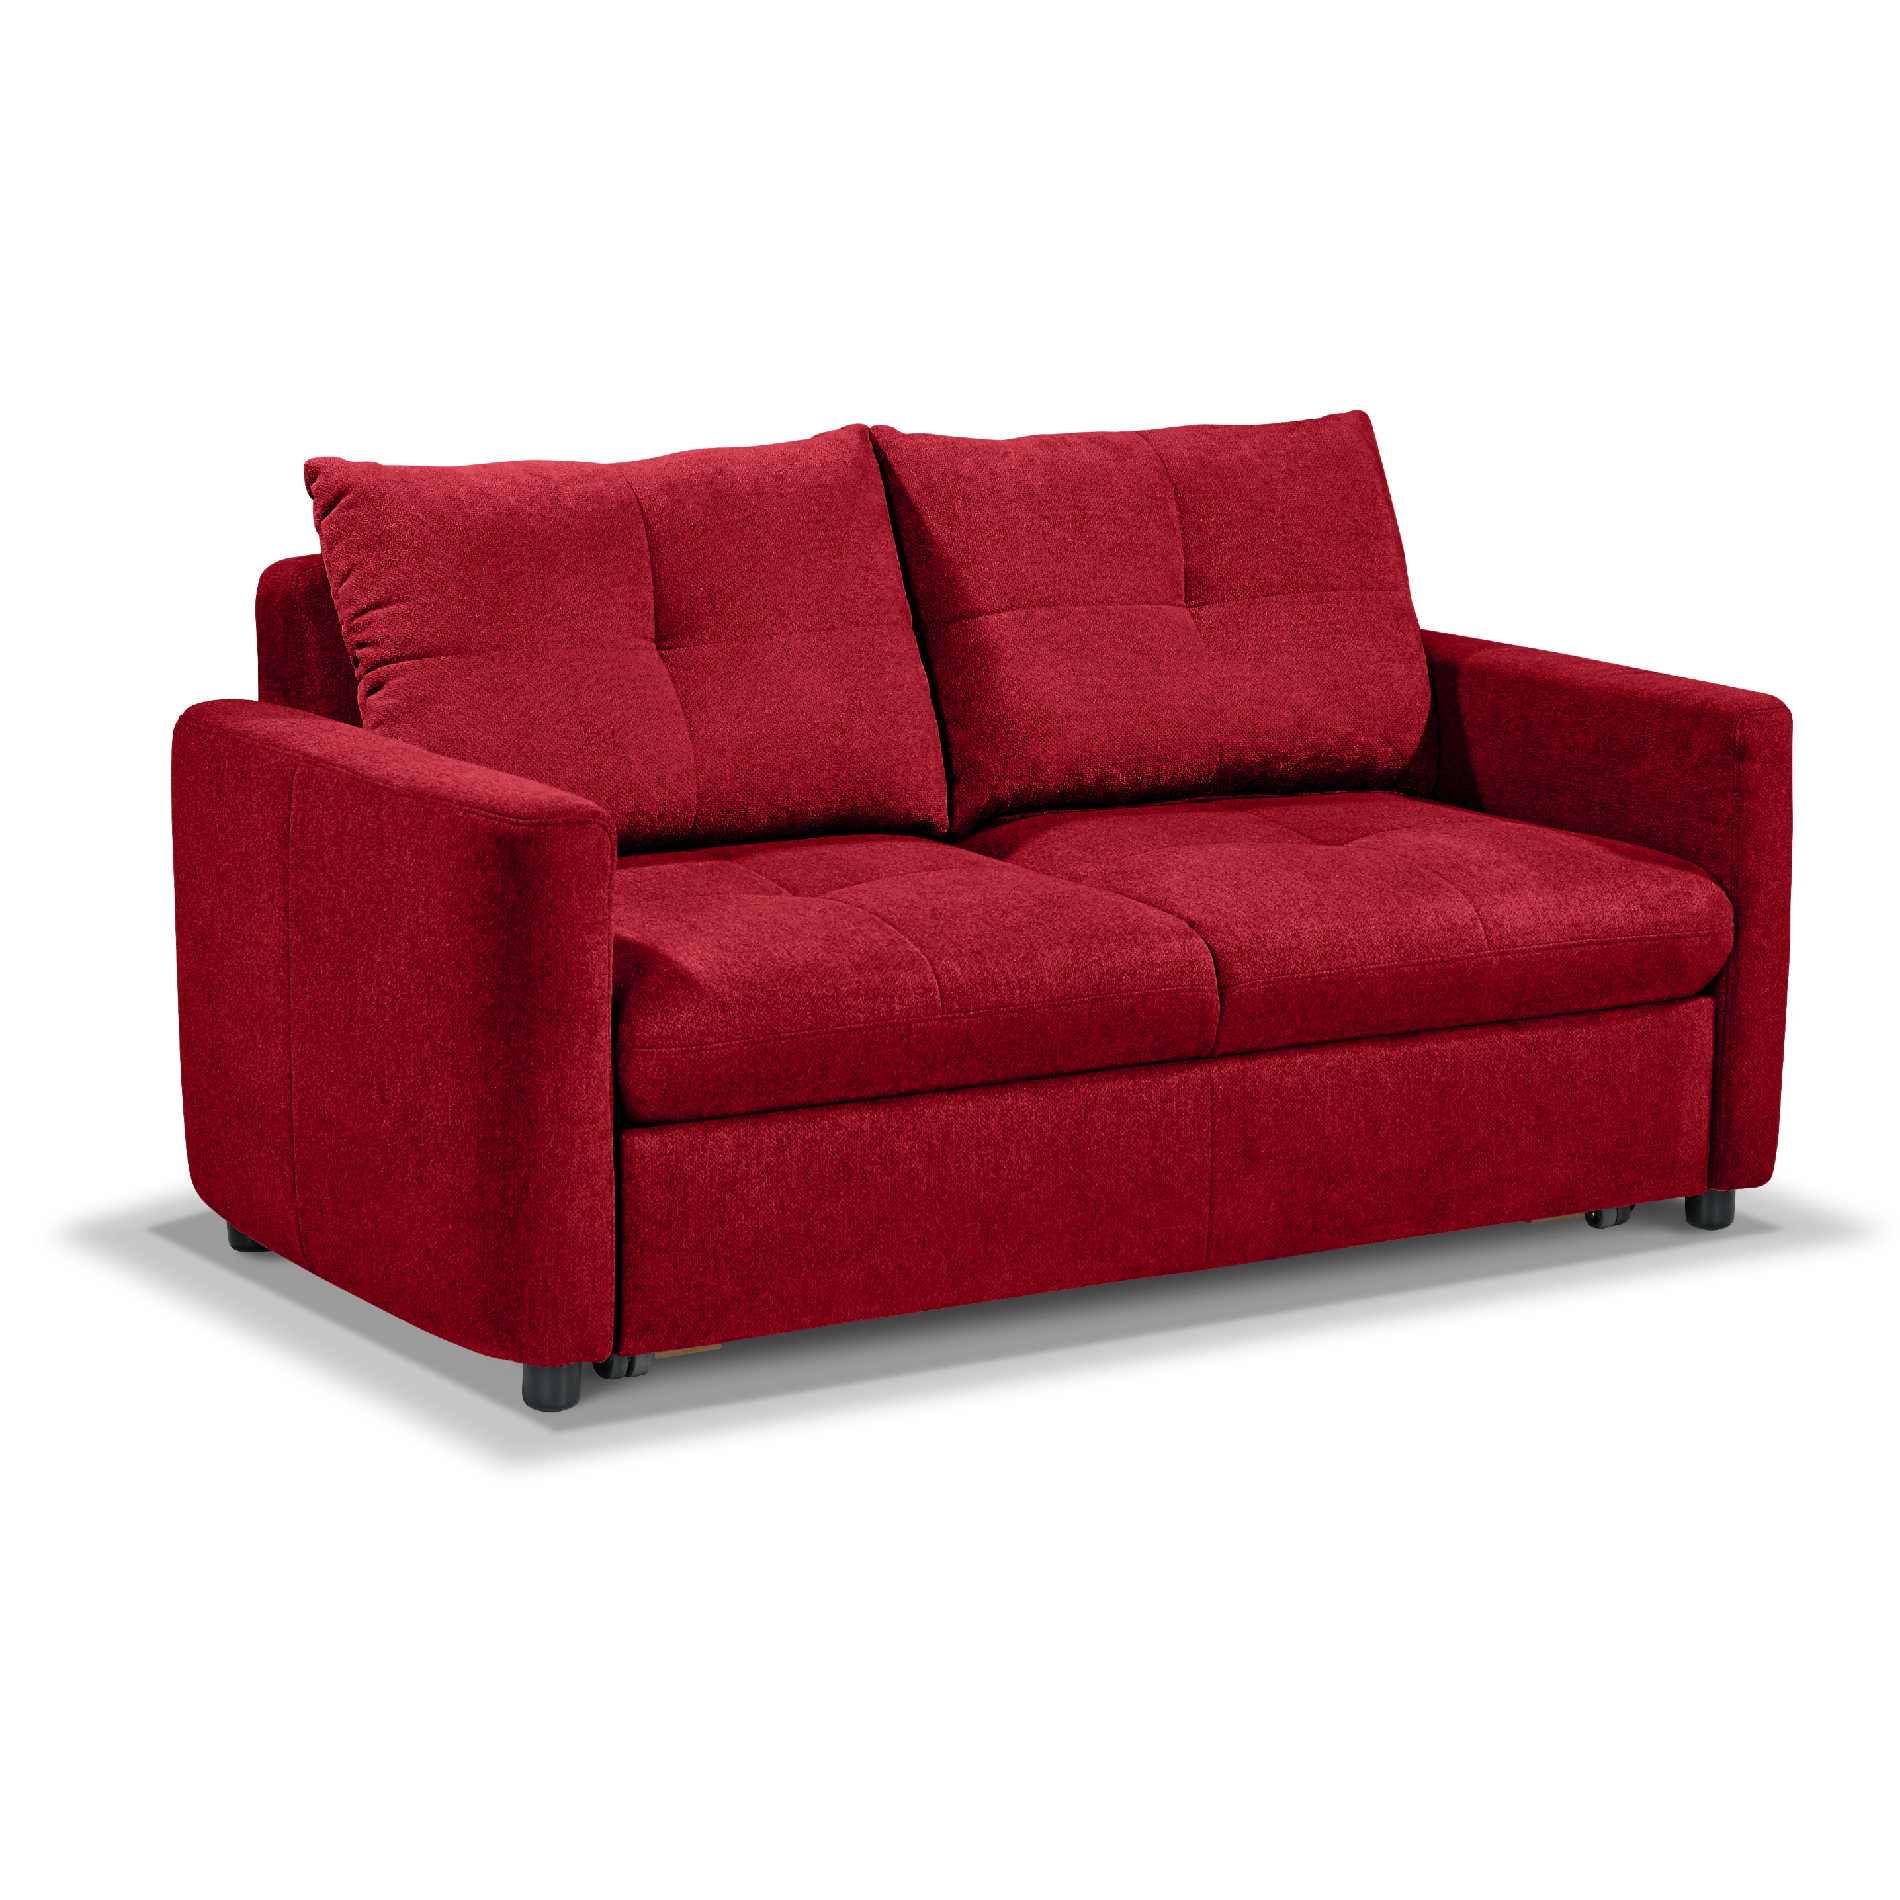 set one by Musterring SO 4200 Sofa Bezug bordeaux